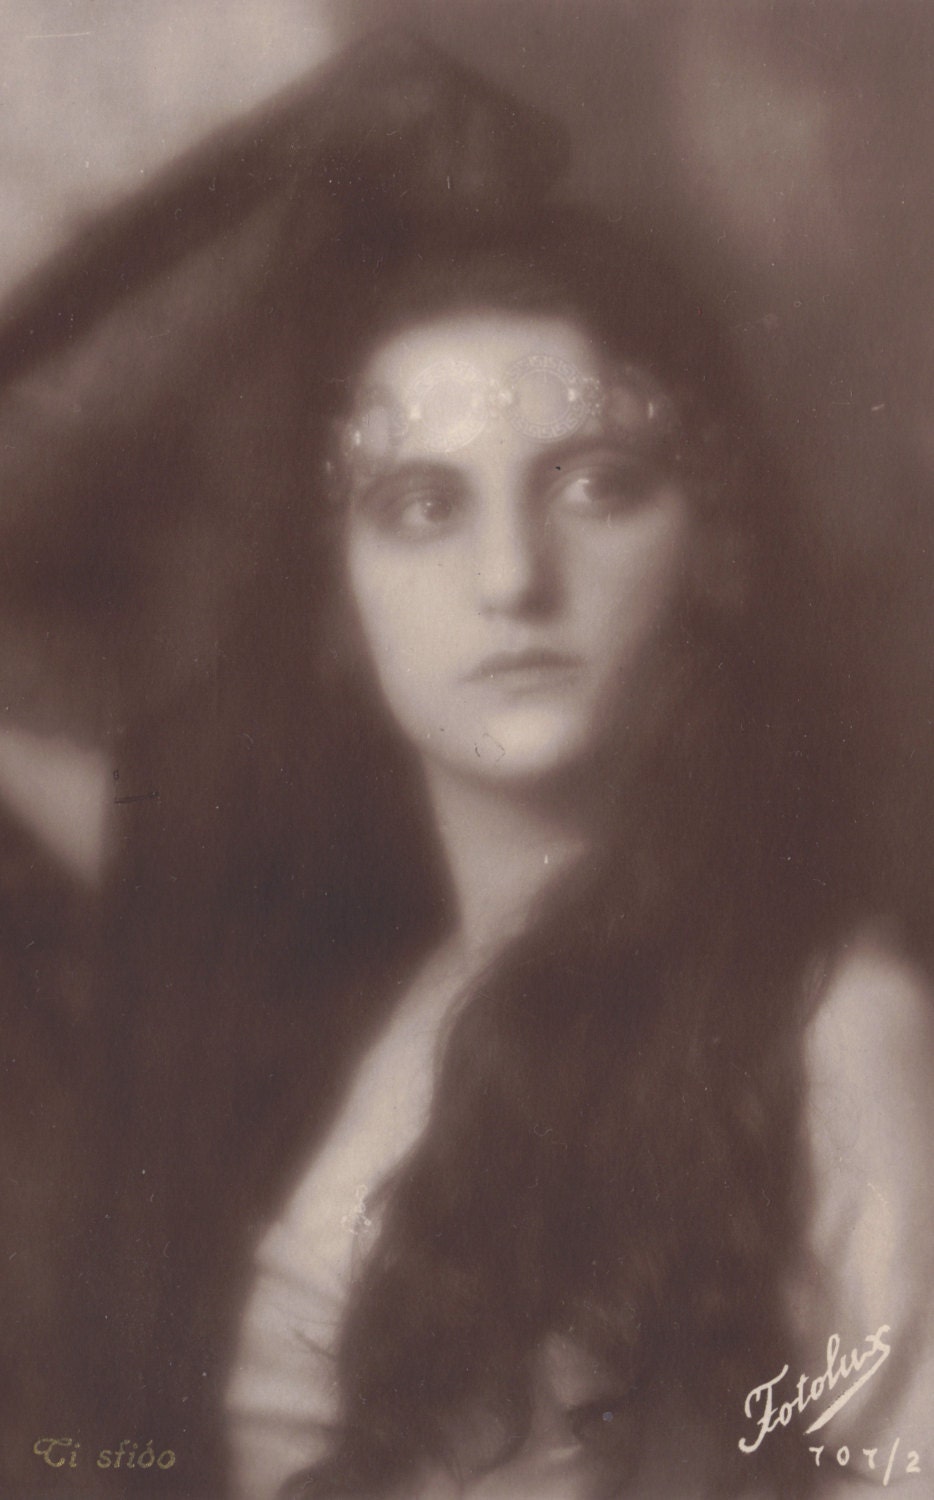 Red Poulaine's Musings: Italian Actress in Soft Focus with Long Hair and  Black Lace I, by G. B. Falci, circa 1920s